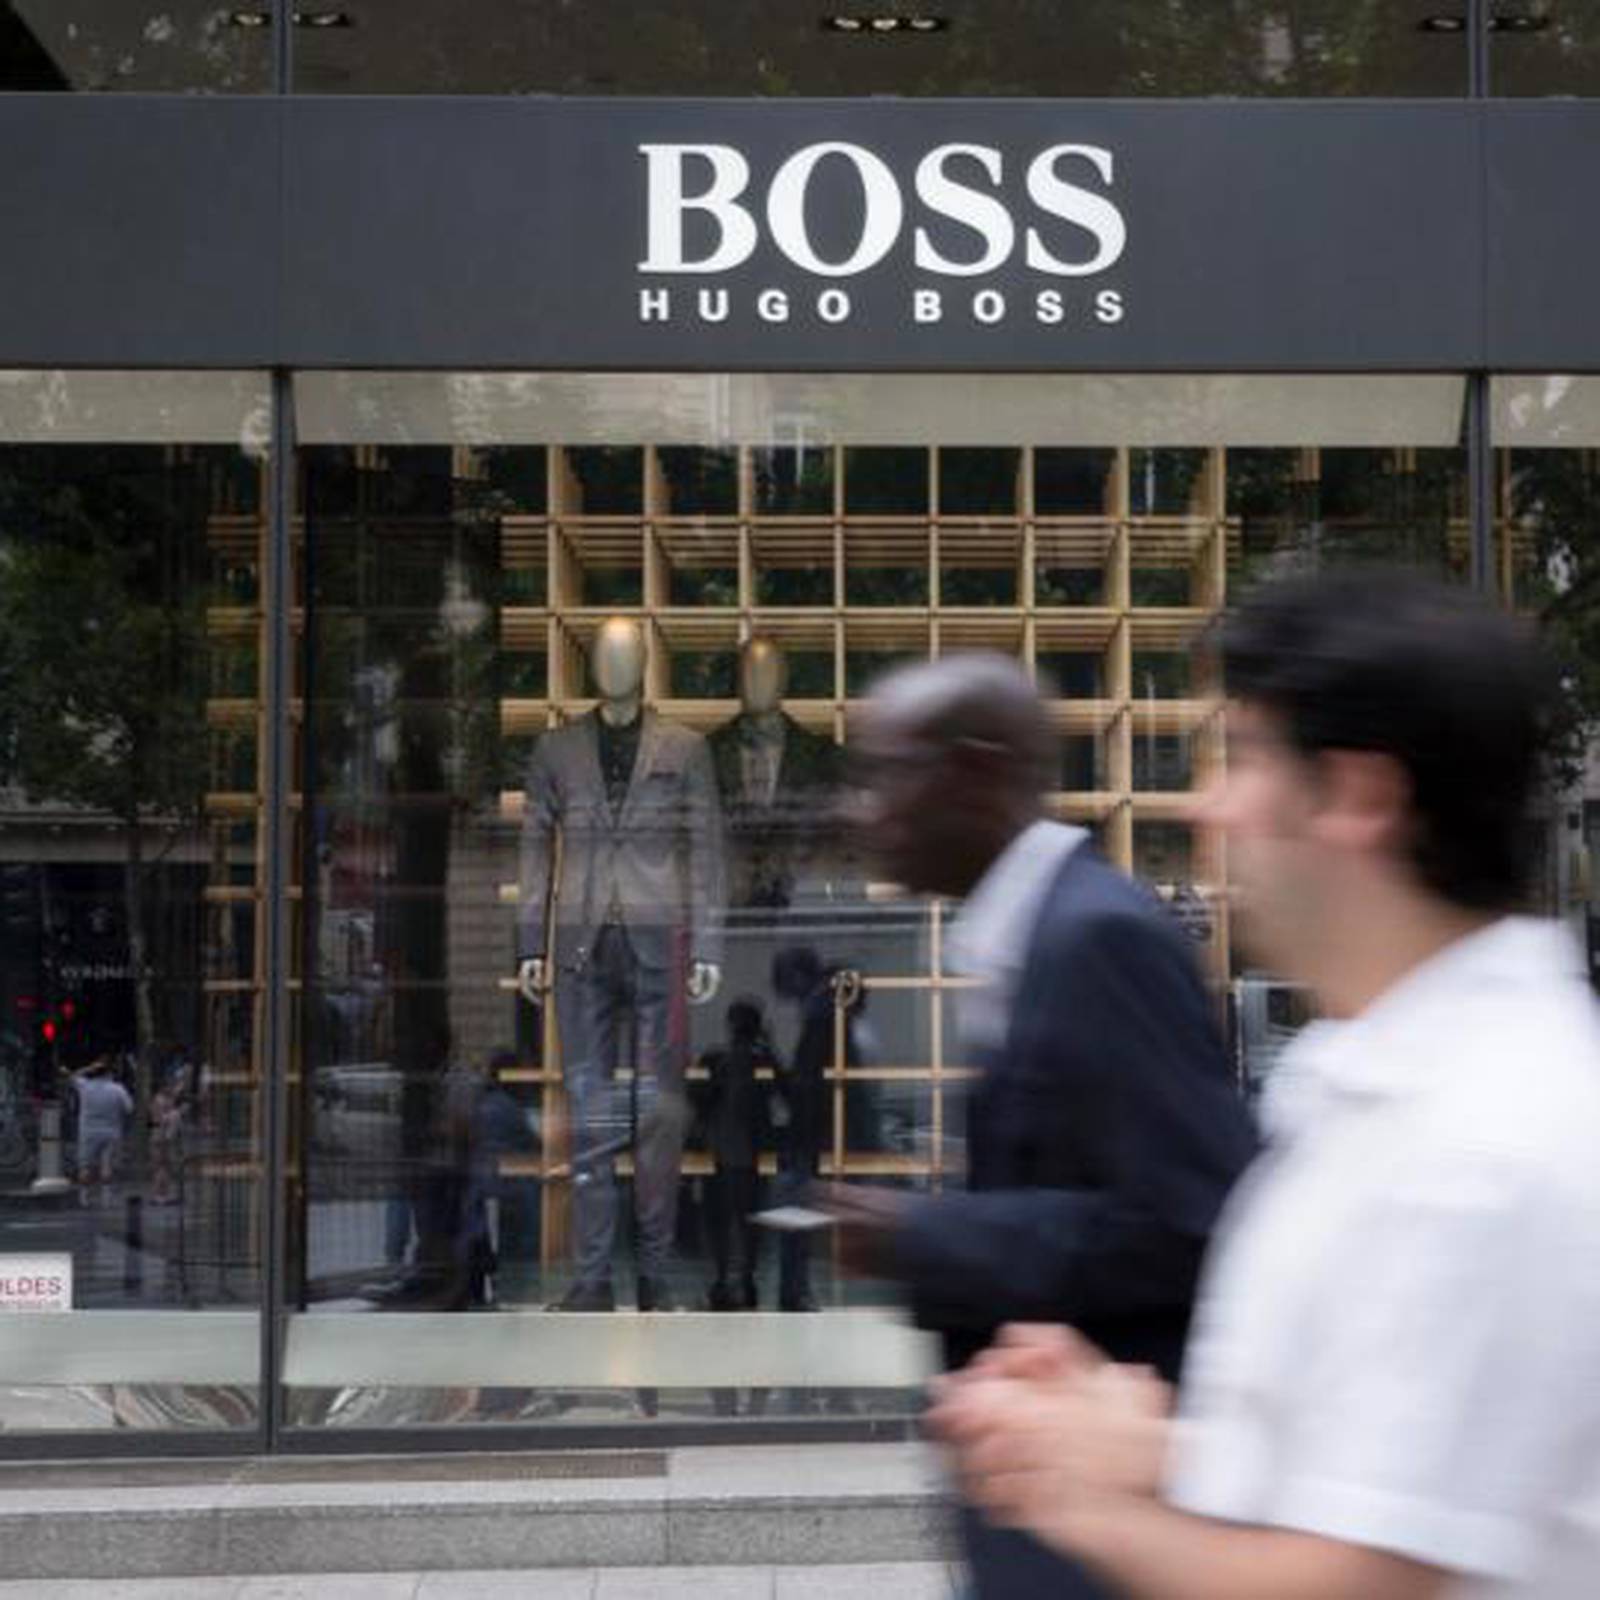 Hugo Boss continues on road to recovery - RetailDetail EU